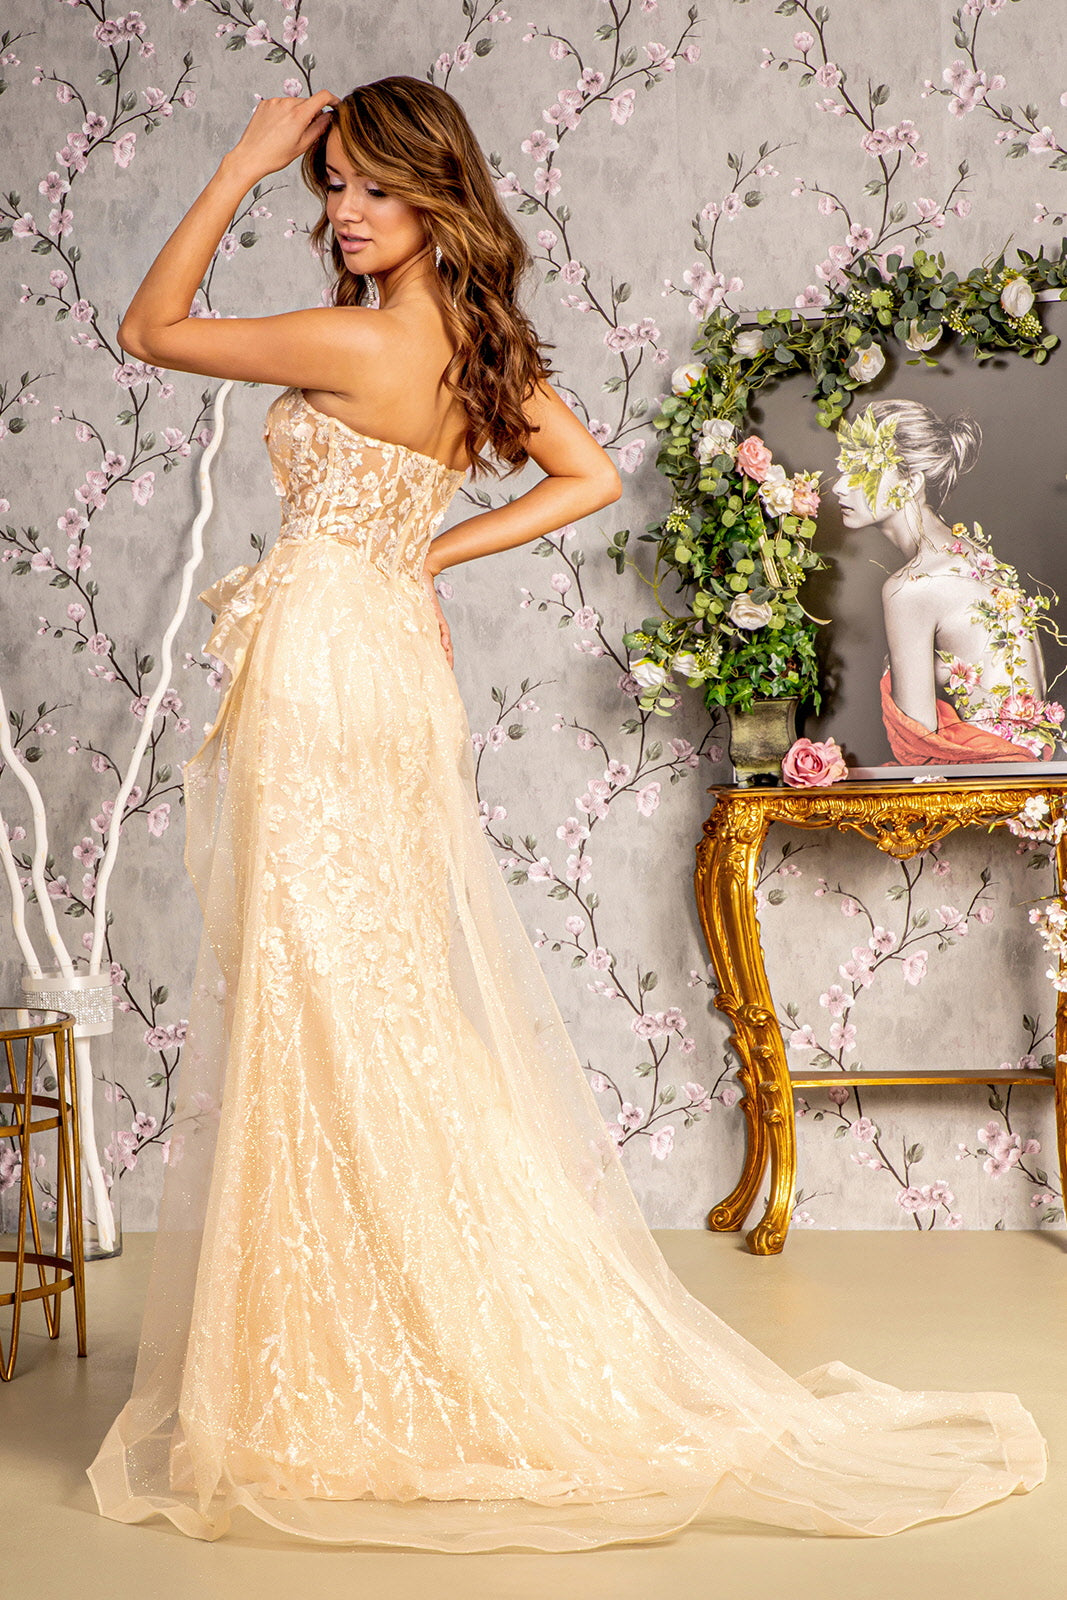 Fitted Applique Strapless Overskirt Gown by GLS Gloria GL3256